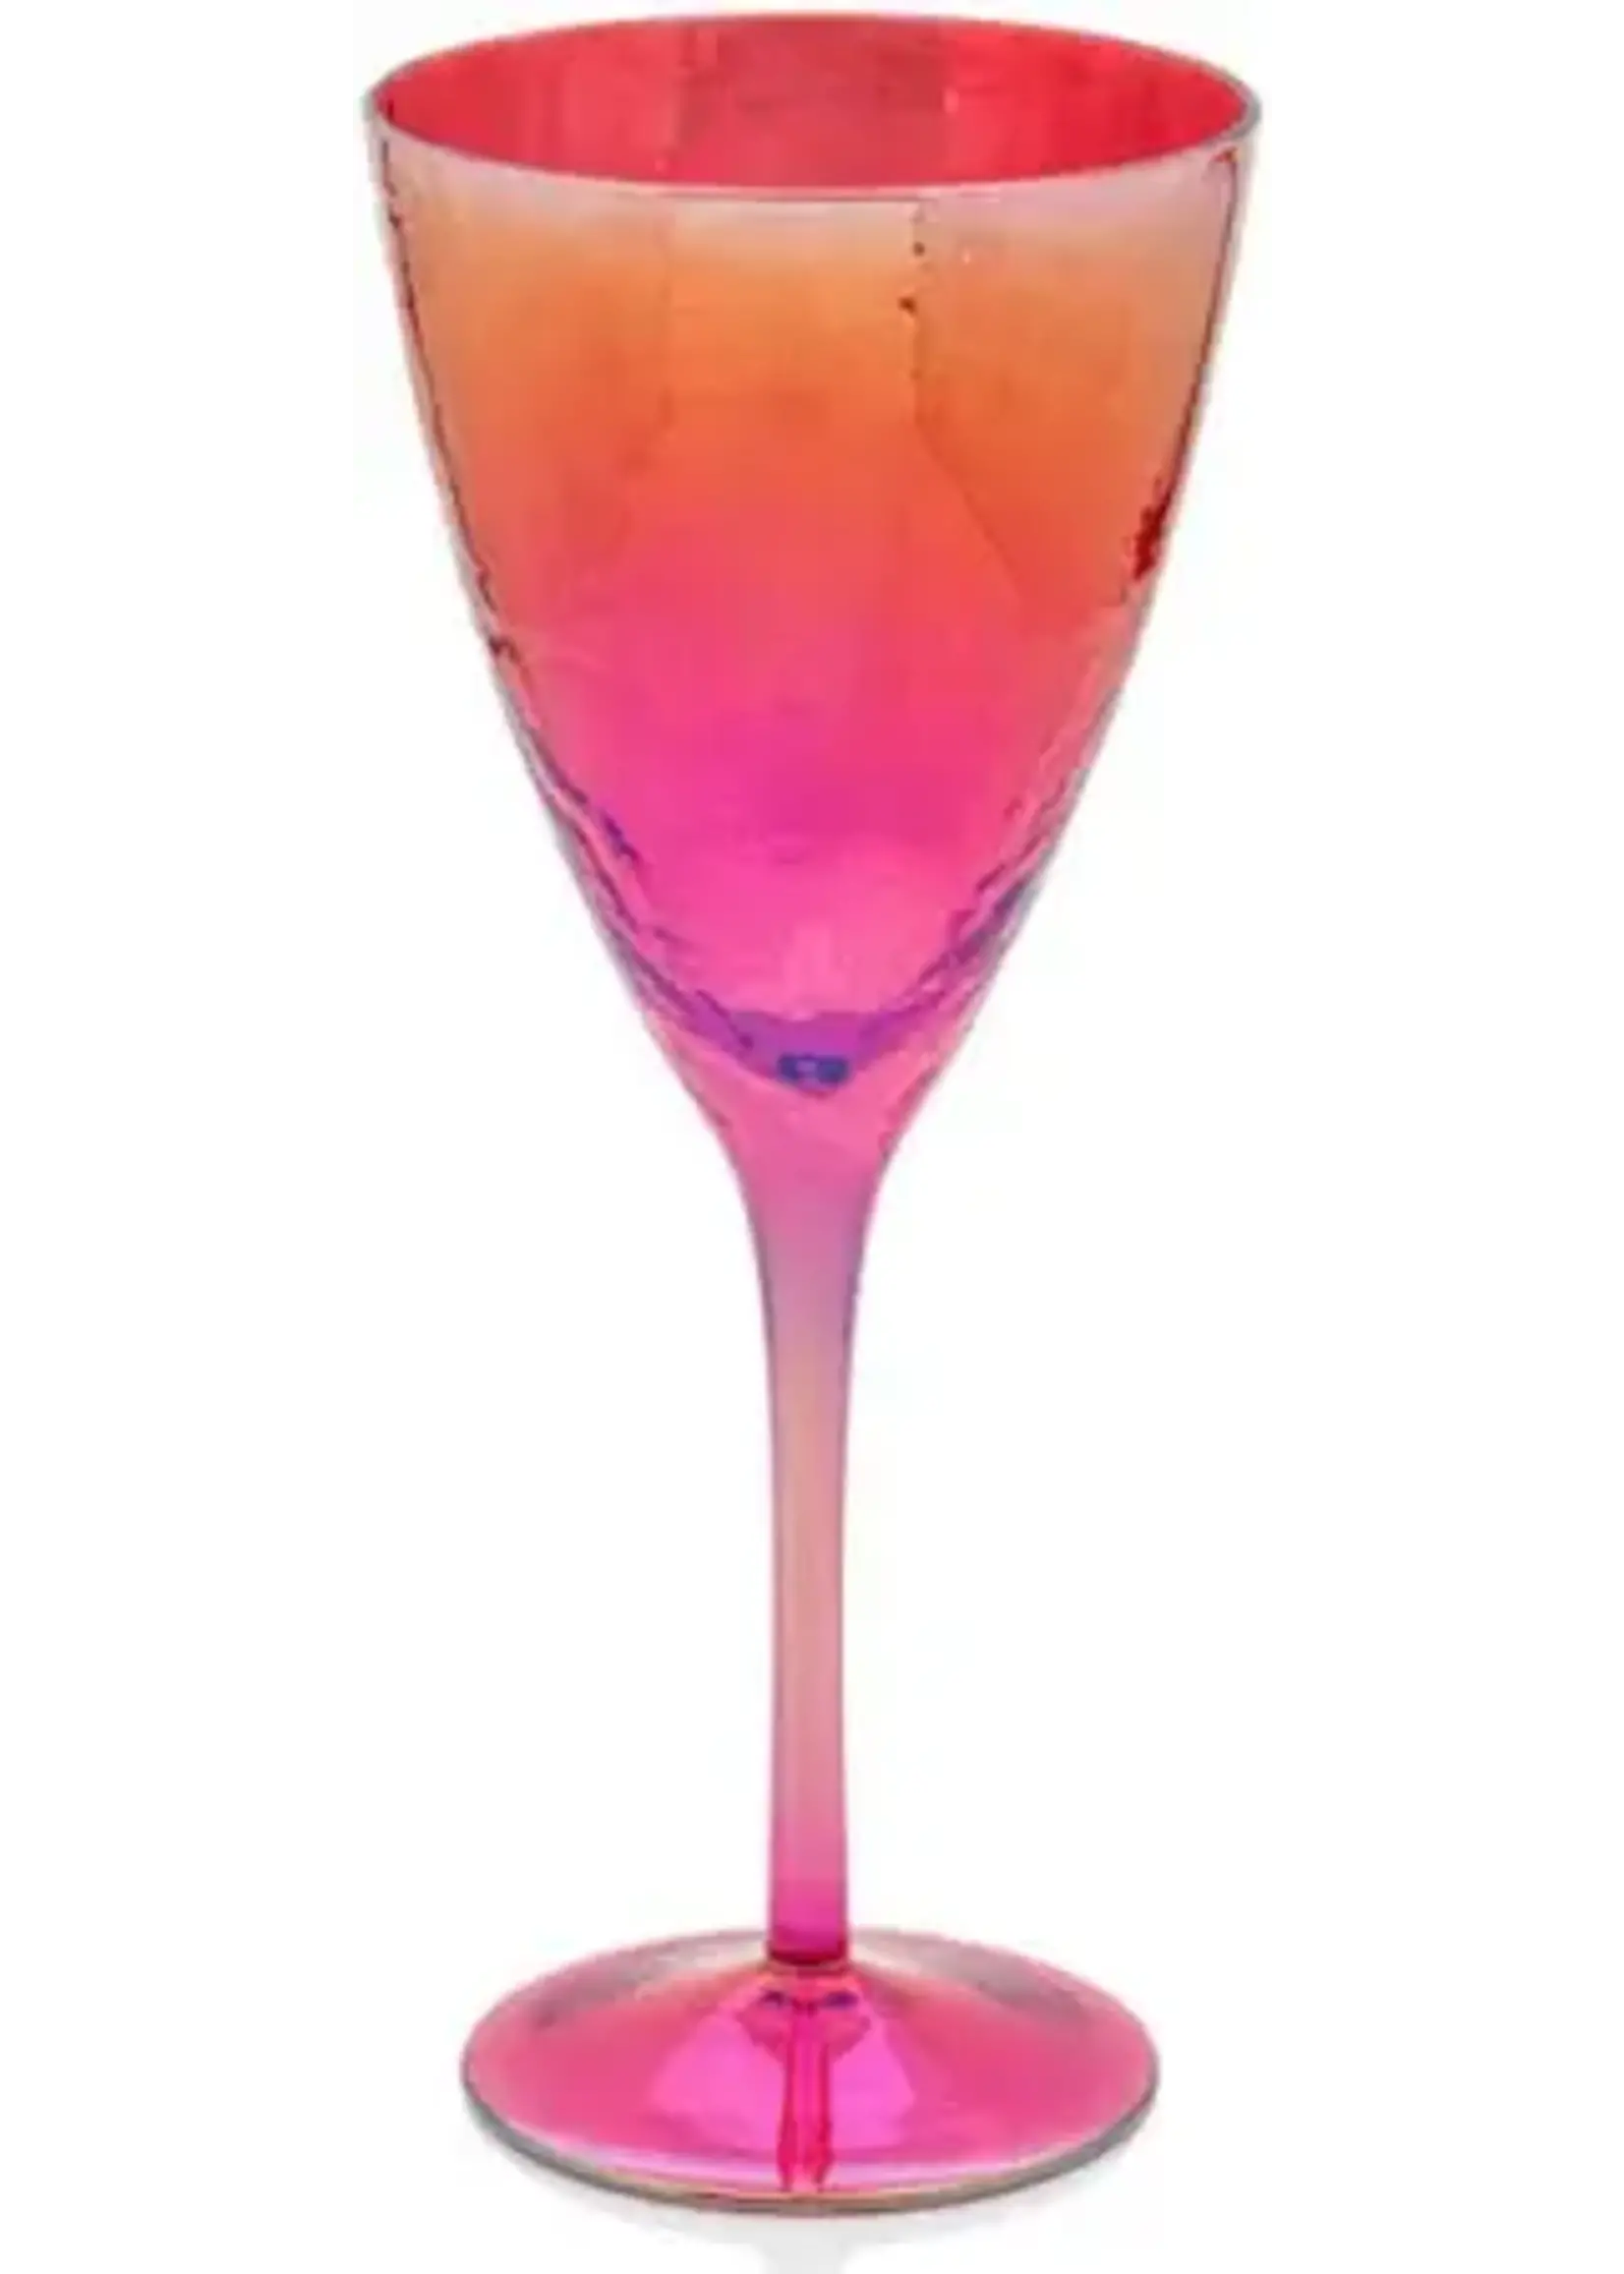 Zodax Aperitivo Red Wine Glass, Luster Red